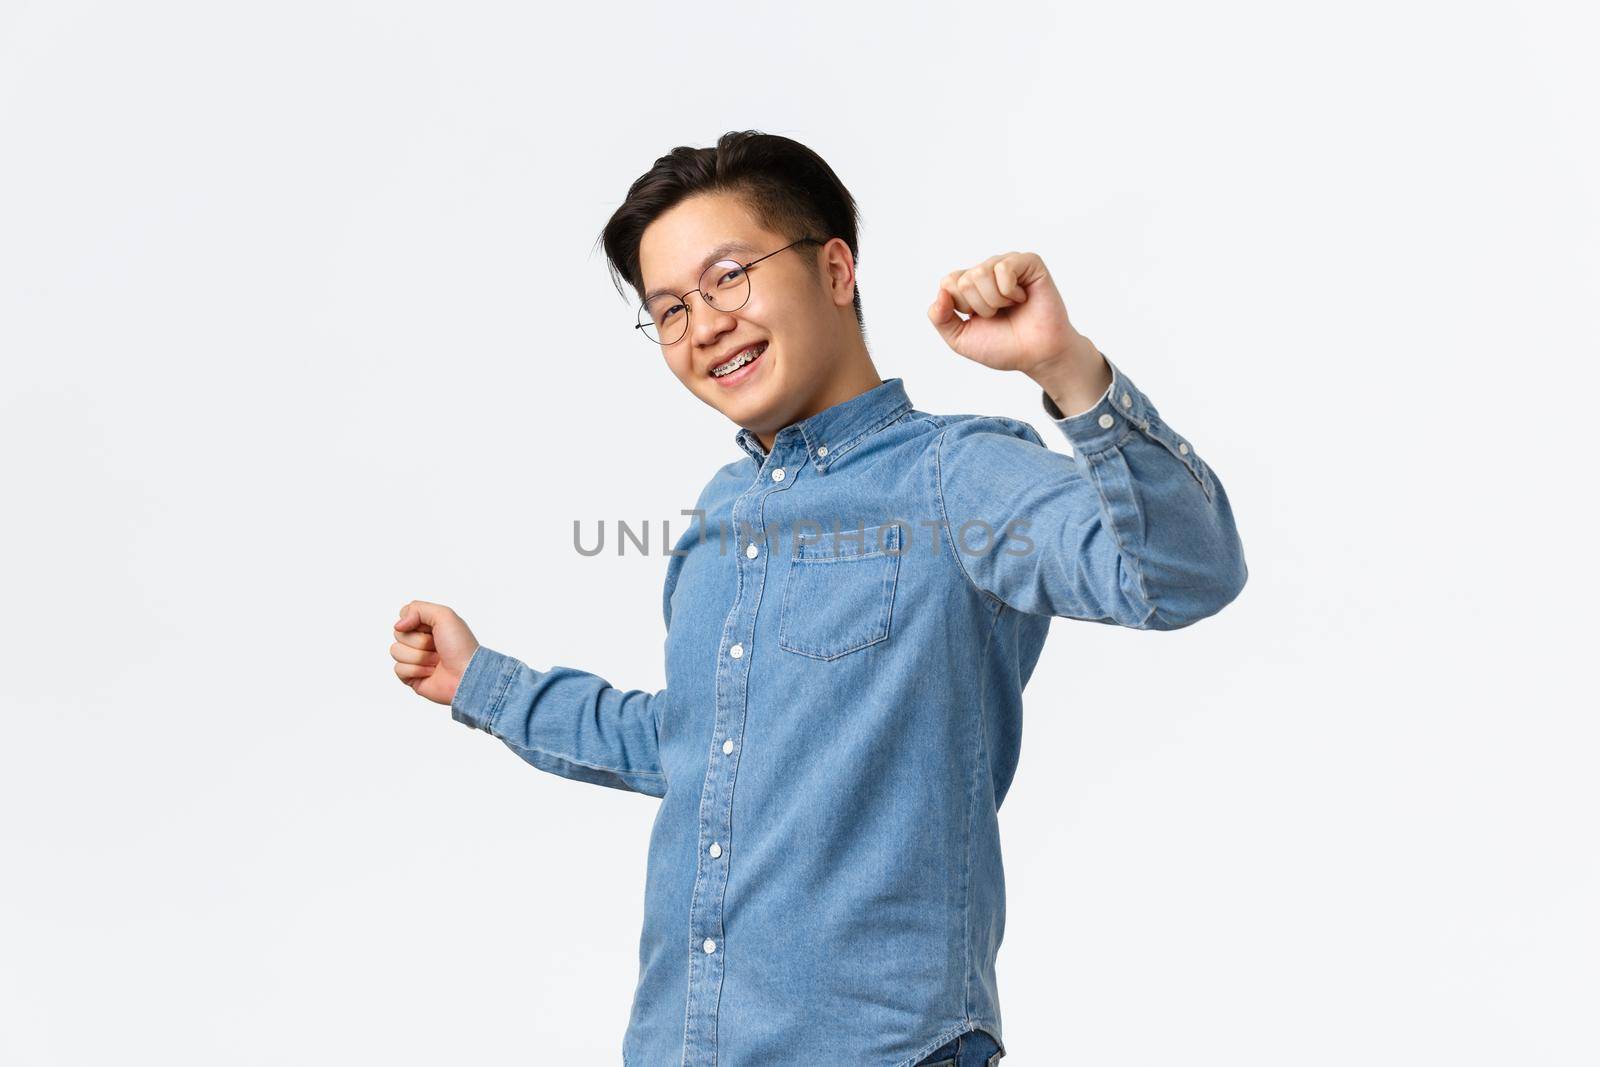 Lifestyle, leisure and technology concept. Young carefree asian man looking upbeat and unbothered, wearing glasses, put braces in dental clinic, dancing happy over white background, smiling.